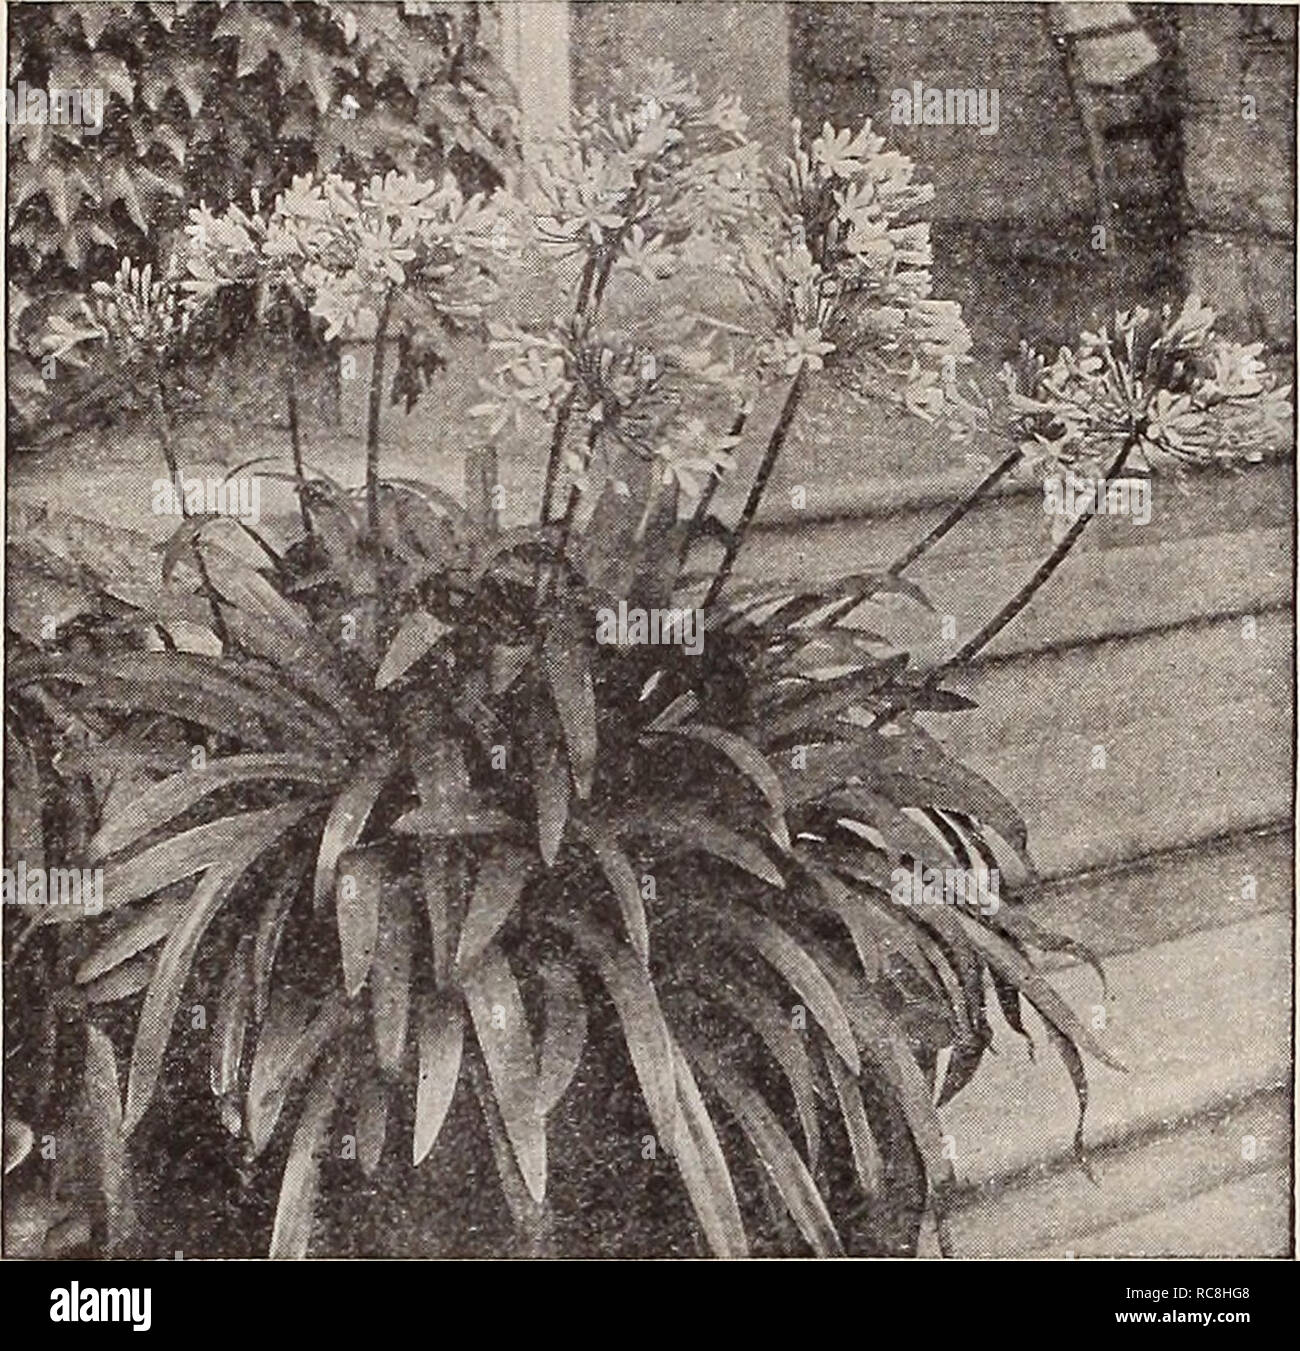 . Dreer's garden book 1932. Seeds Catalogs; Nursery stock Catalogs; Gardening Equipment and supplies Catalogs; Flowers Seeds Catalogs; Vegetables Seeds Catalogs; Fruit Seeds Catalogs. 156 /flEimmi GARDEN* GREENHOUSE PLANTS f PHMJELPMI THE GARDEN AND GREENHOUSE PLANTS FOR. Agapanthus Umbellatus Agapanthus Umbellatus (Blue Lily of the Nile). A splendid ornamental plant, bearing clusters of bright, blue flowers on 3 feet long flower stalks lasting a long time in bloom. A most desirable plant for outdoor decoration, planted in large pots or tubs on the lawn or piazza. Strong flowering plants from  Stock Photo